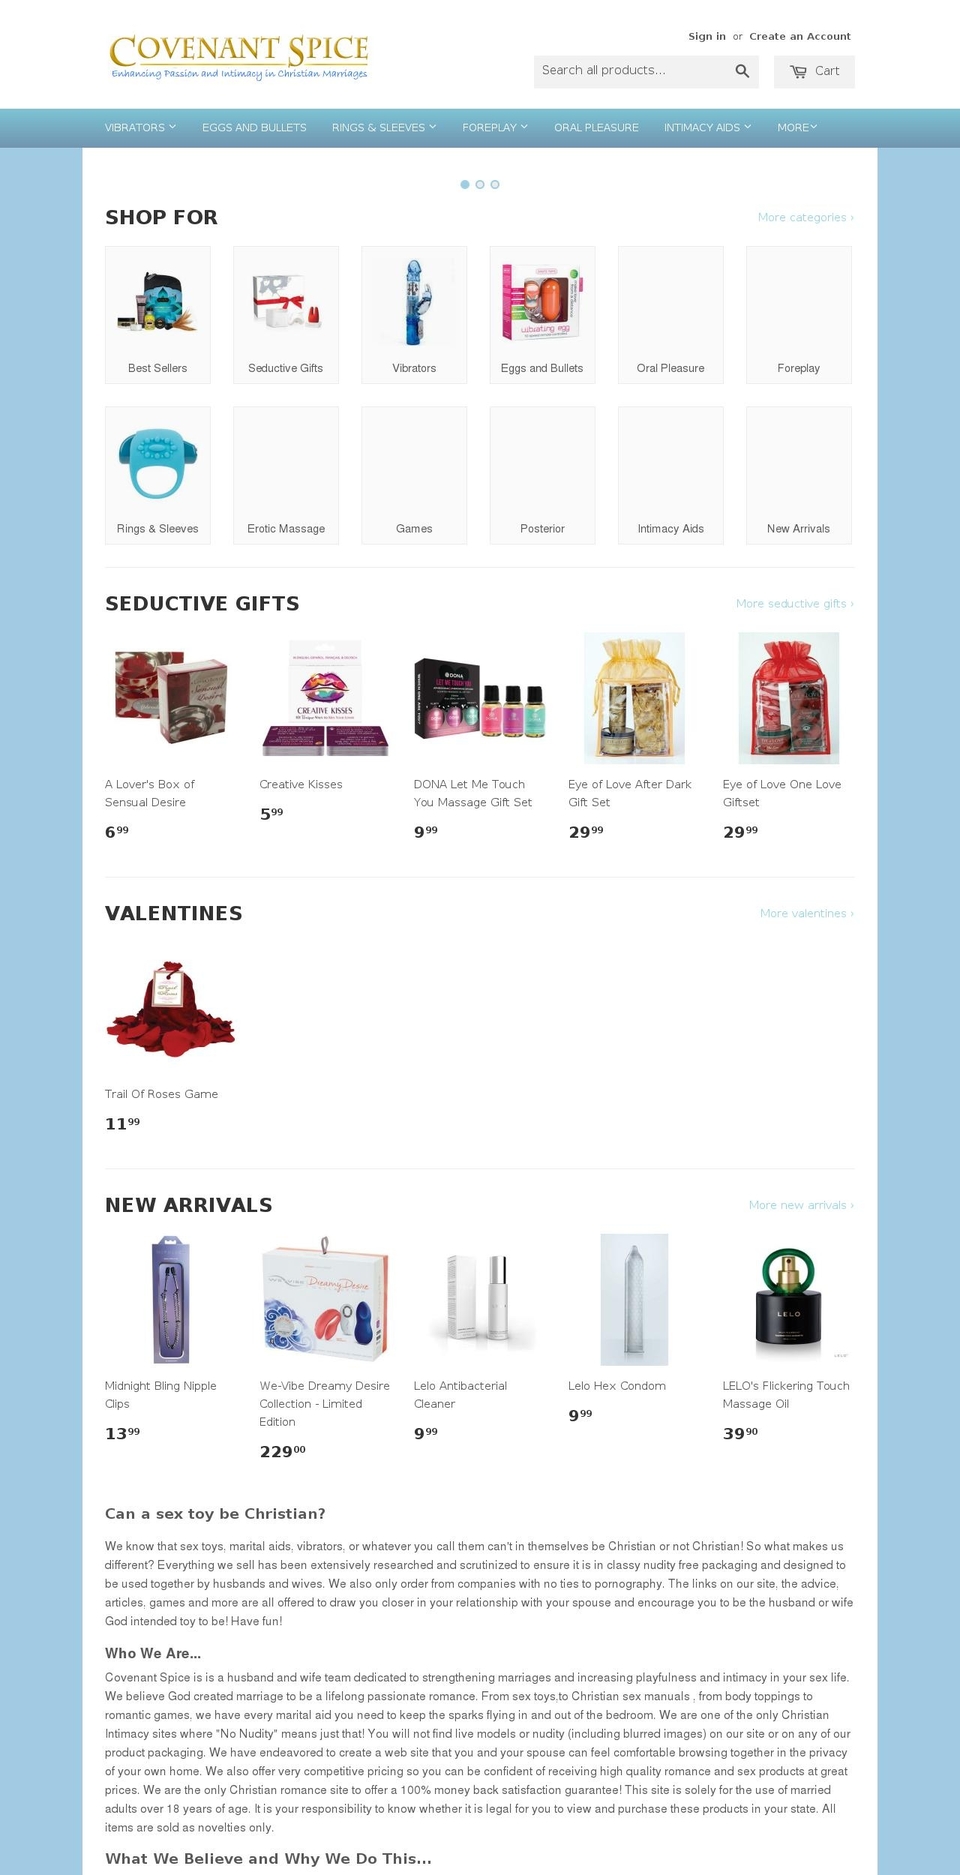 Supply Shopify theme site example covenantspice.com